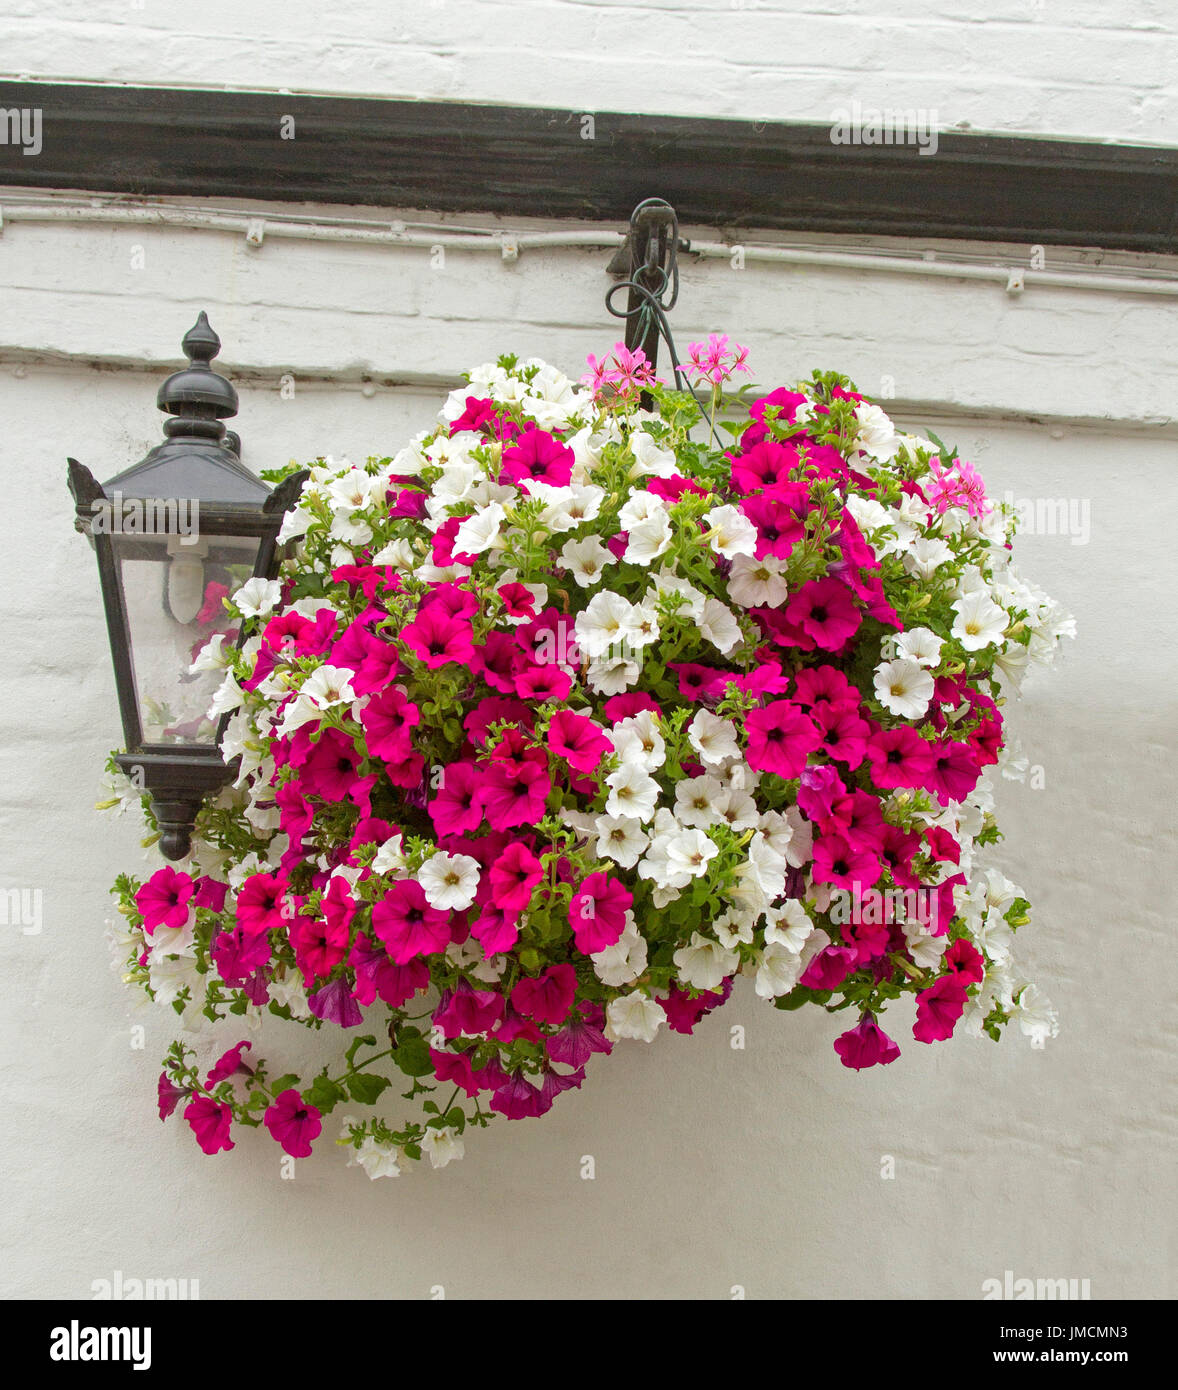 Mass of stunning colourful flowering annuals, white and vivid red petunias, in hanging basket against white wall Stock Photo